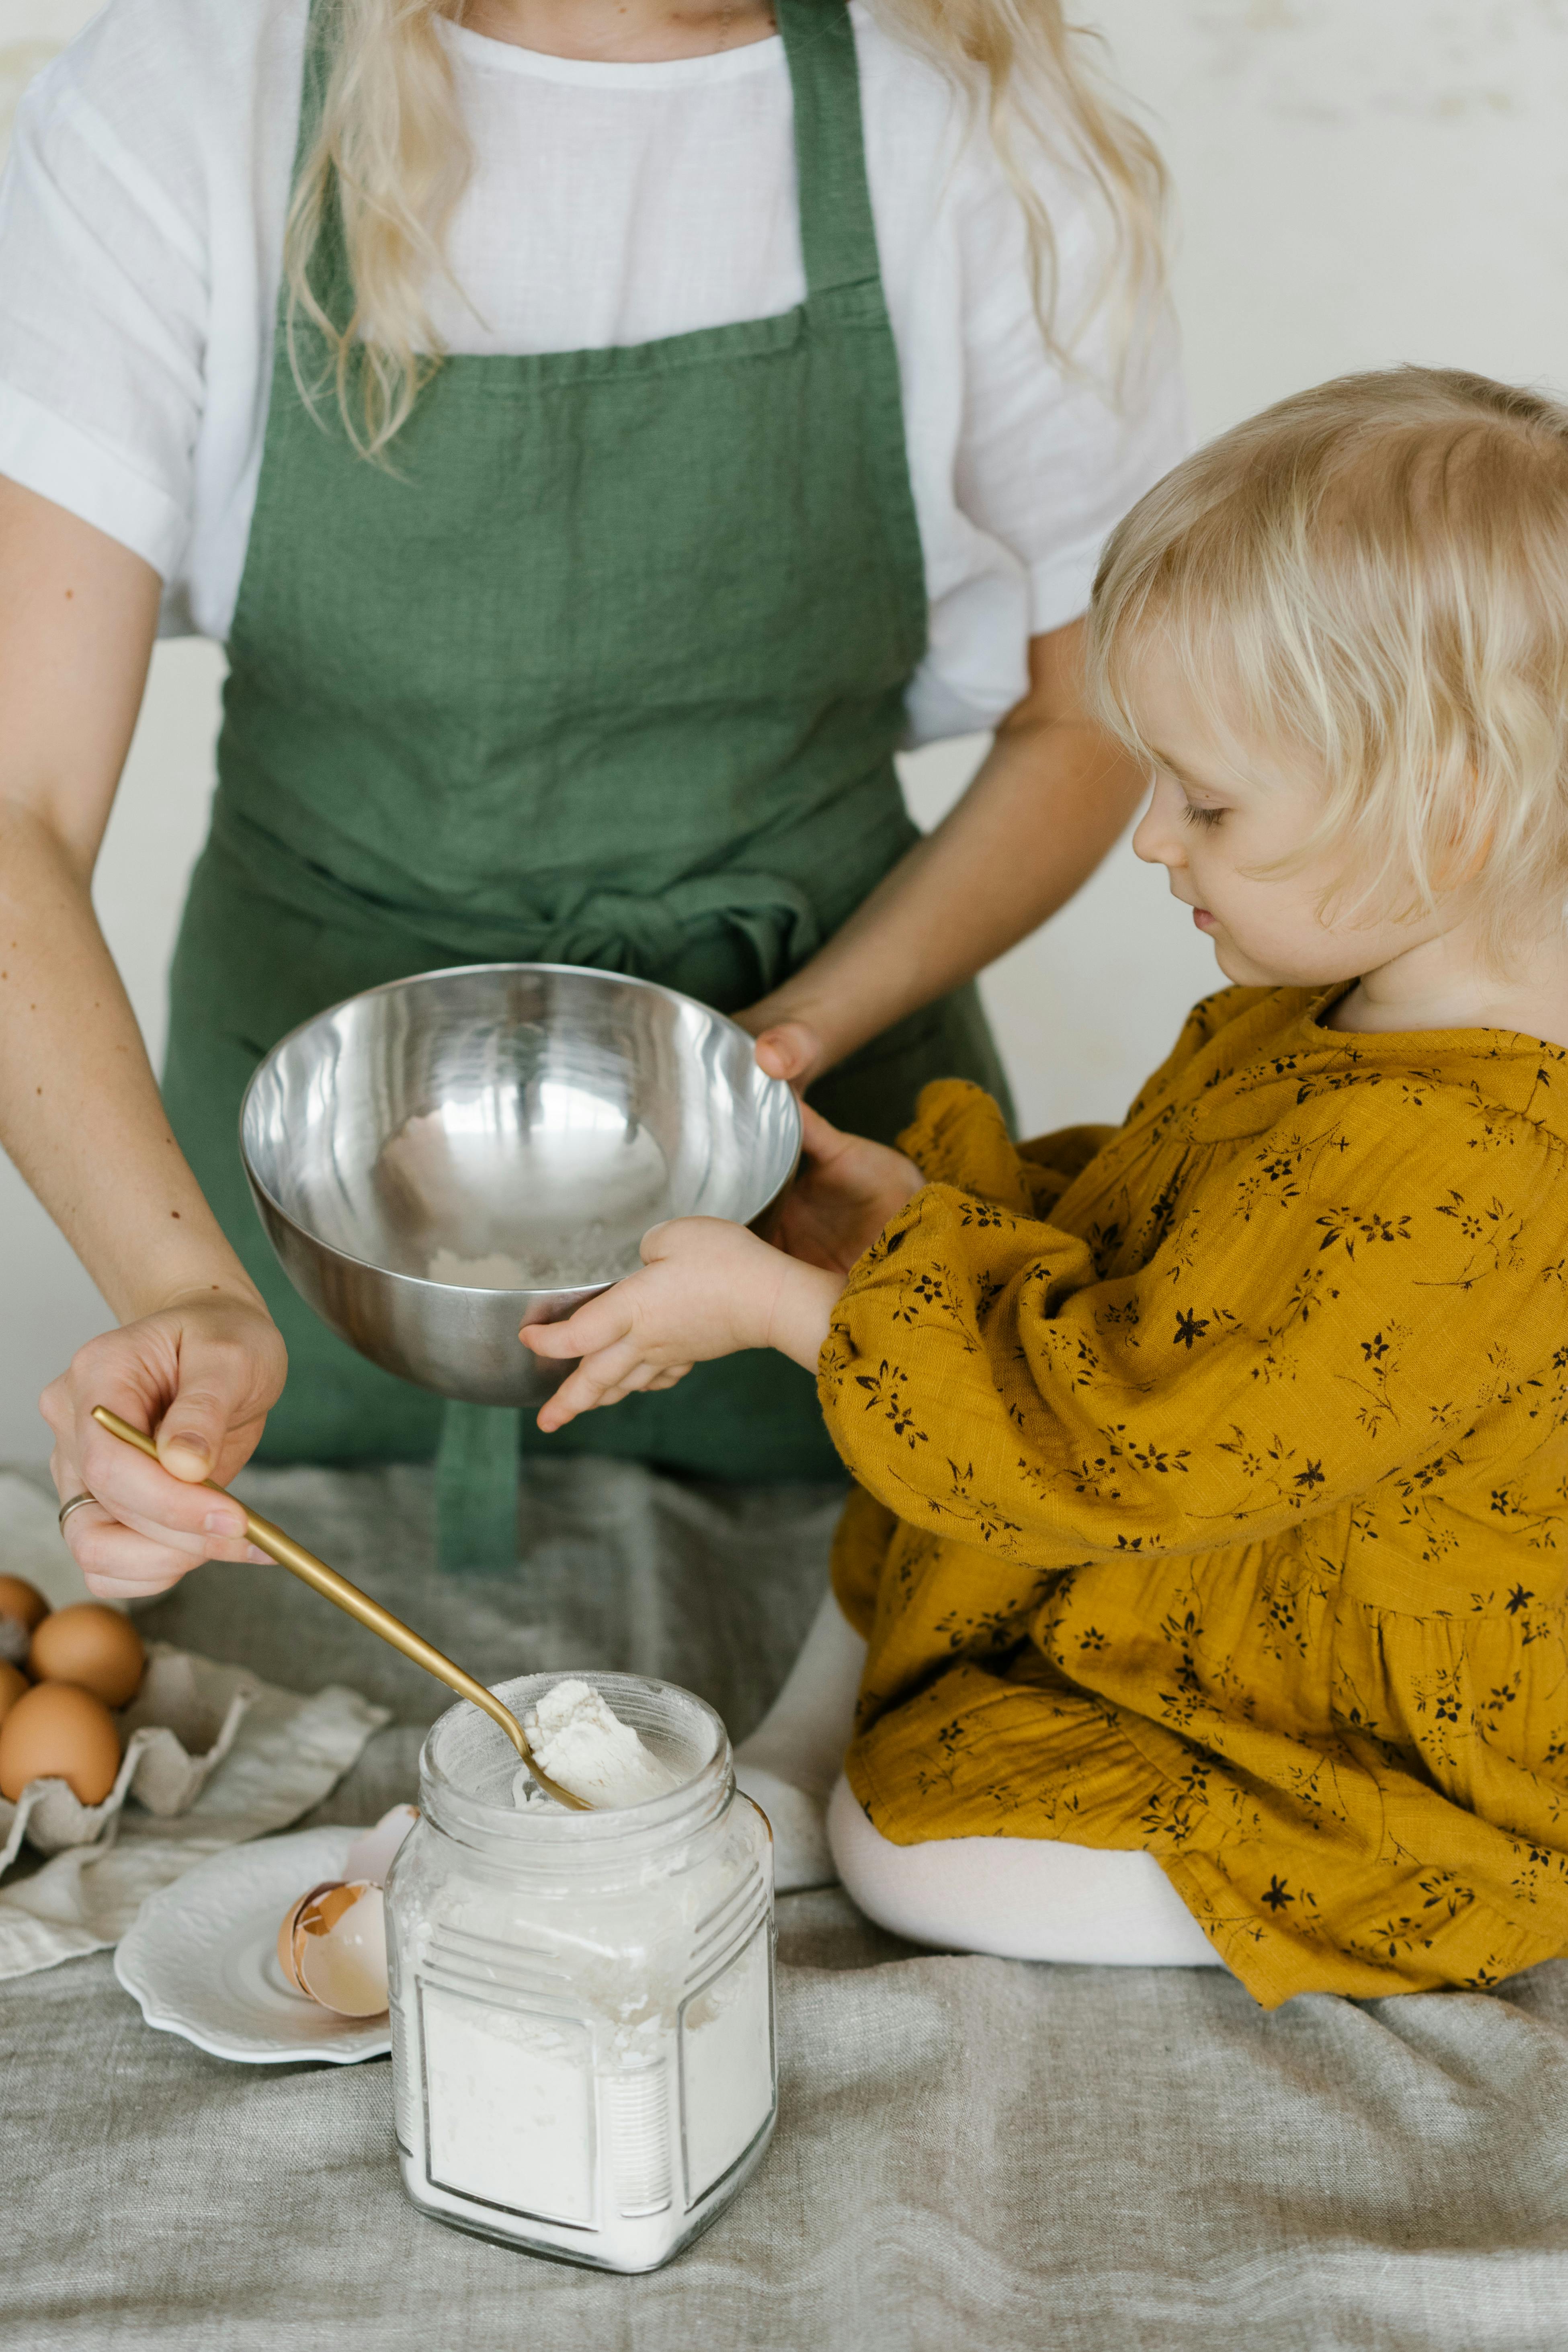 A mom and her baby cooking | Source: Pexels